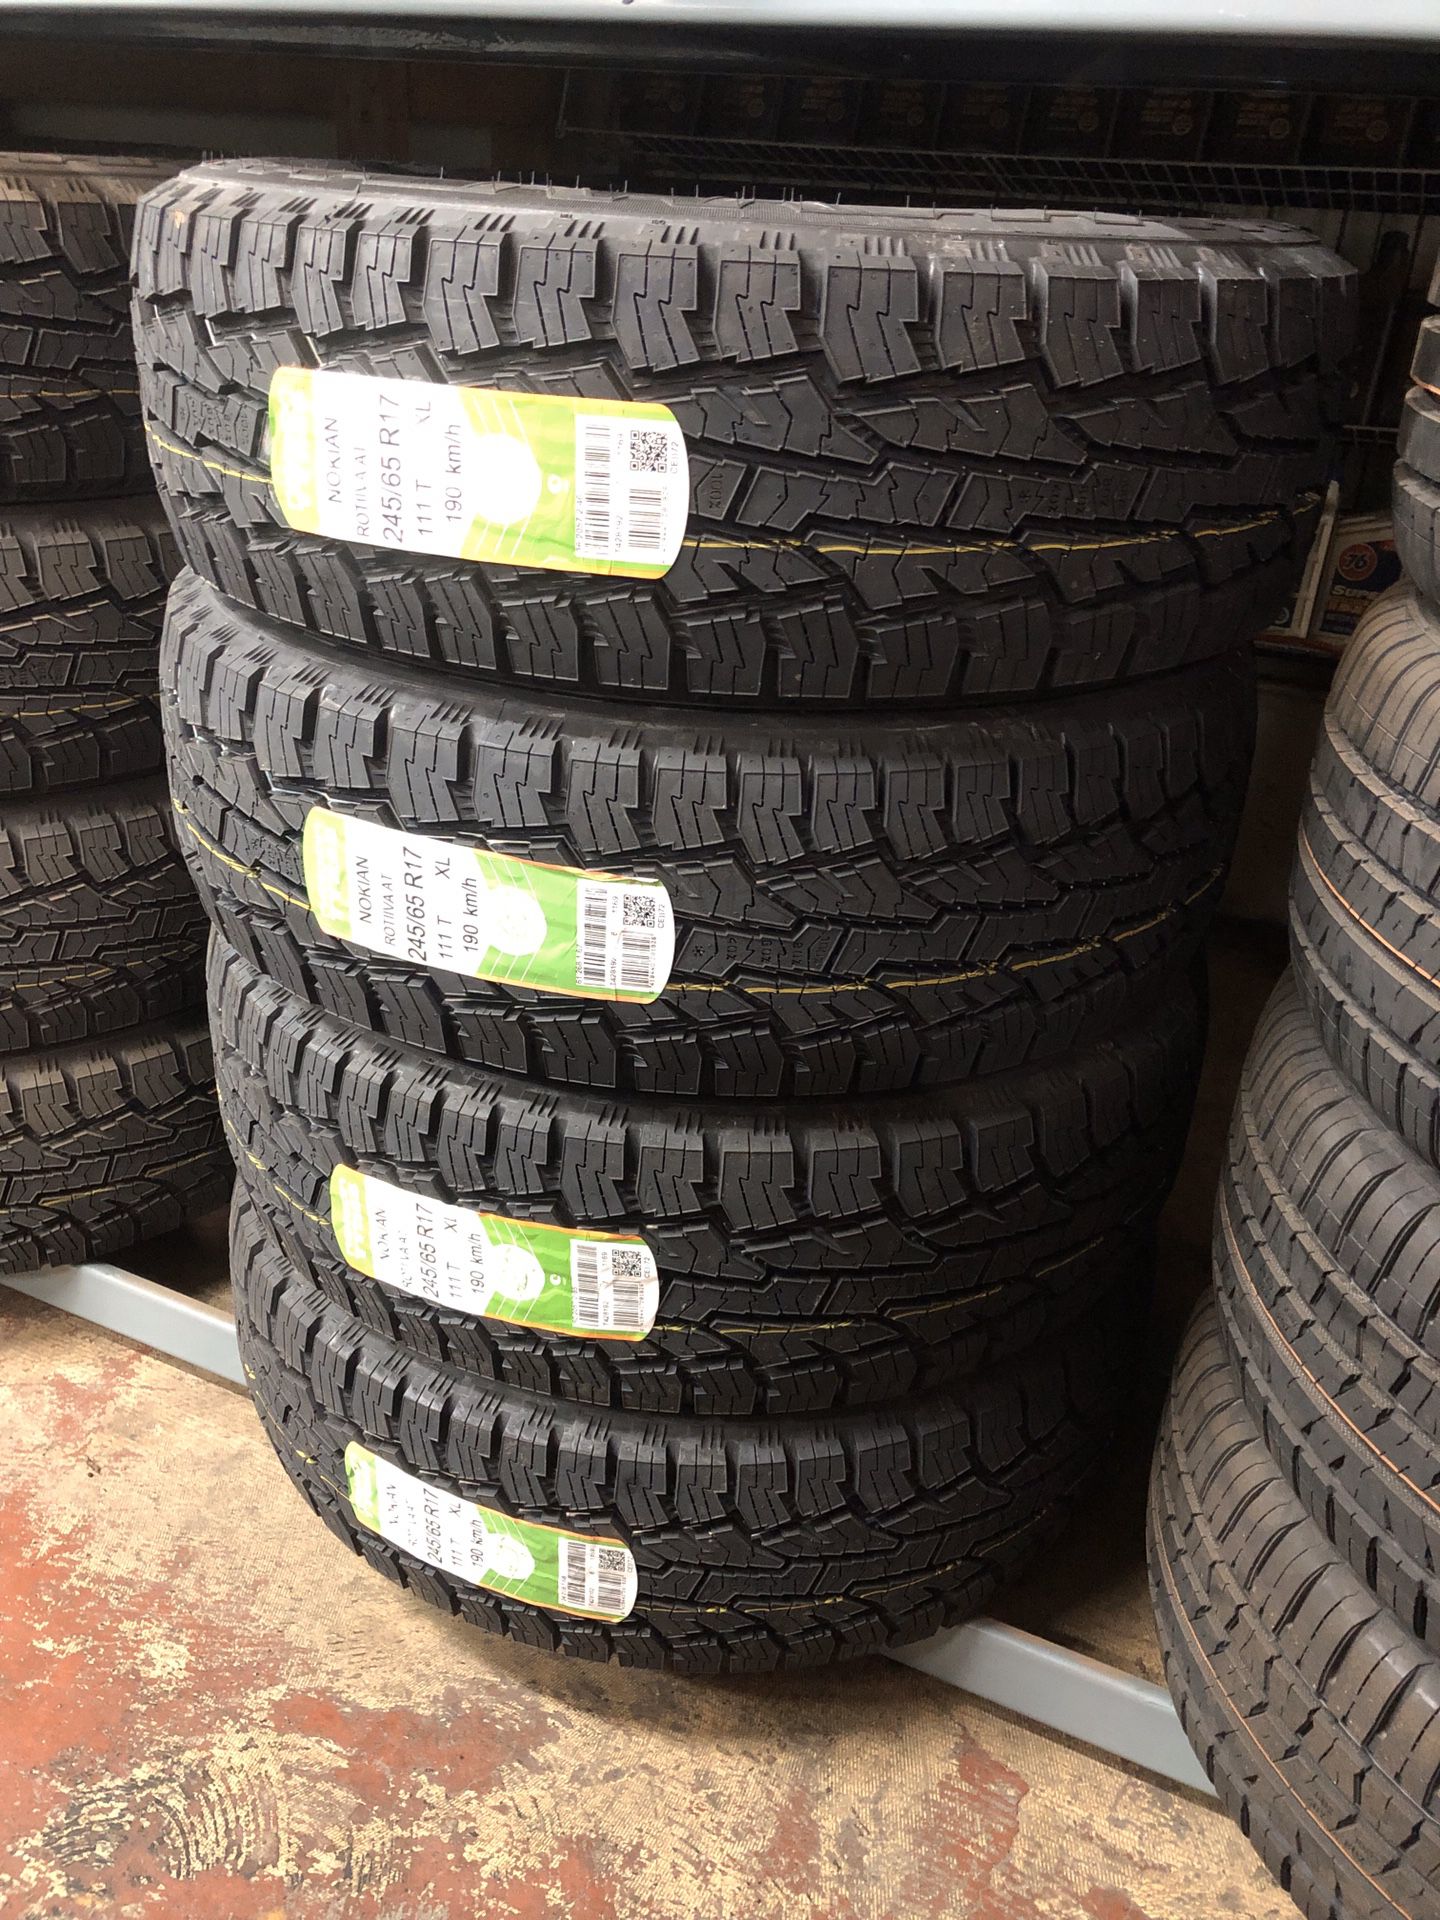 🔥 New 245/65/17 Nokian Tires 🔥 FREE mount and balance 🔥